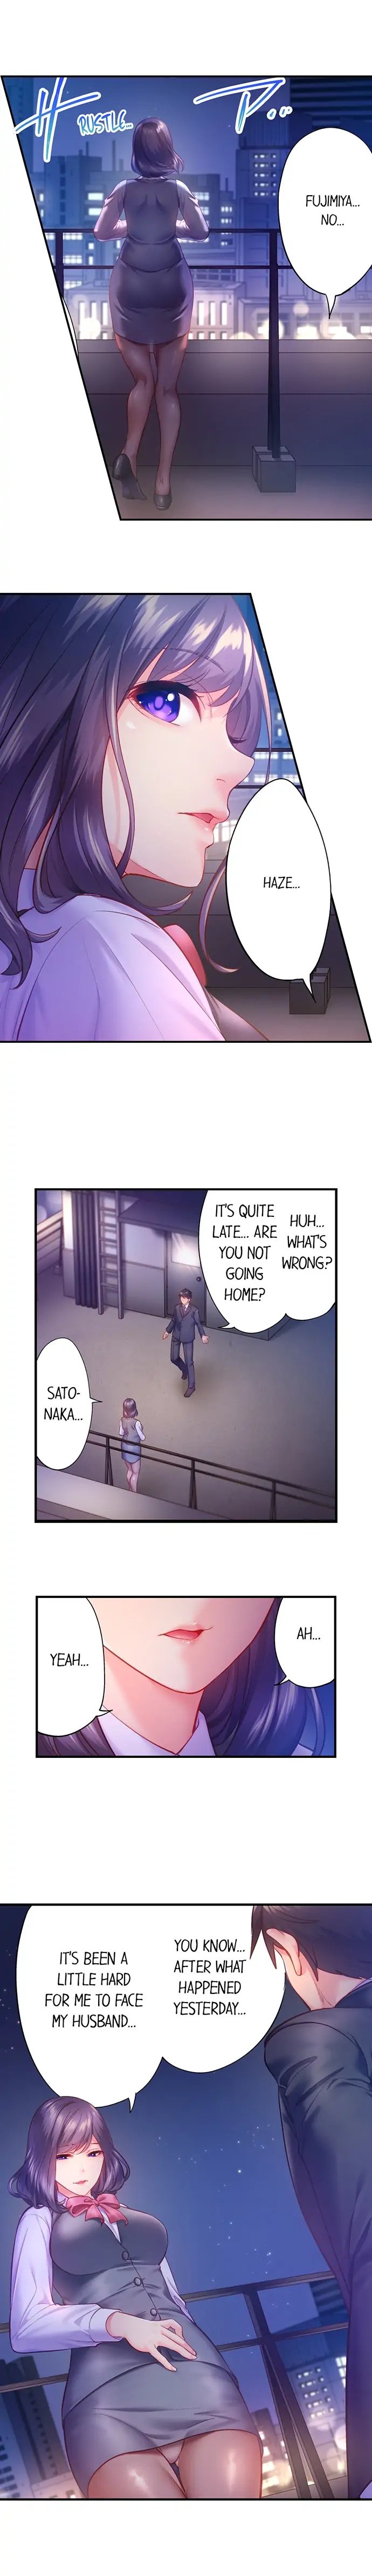 first-time-with-my-wife-again-chap-8-5